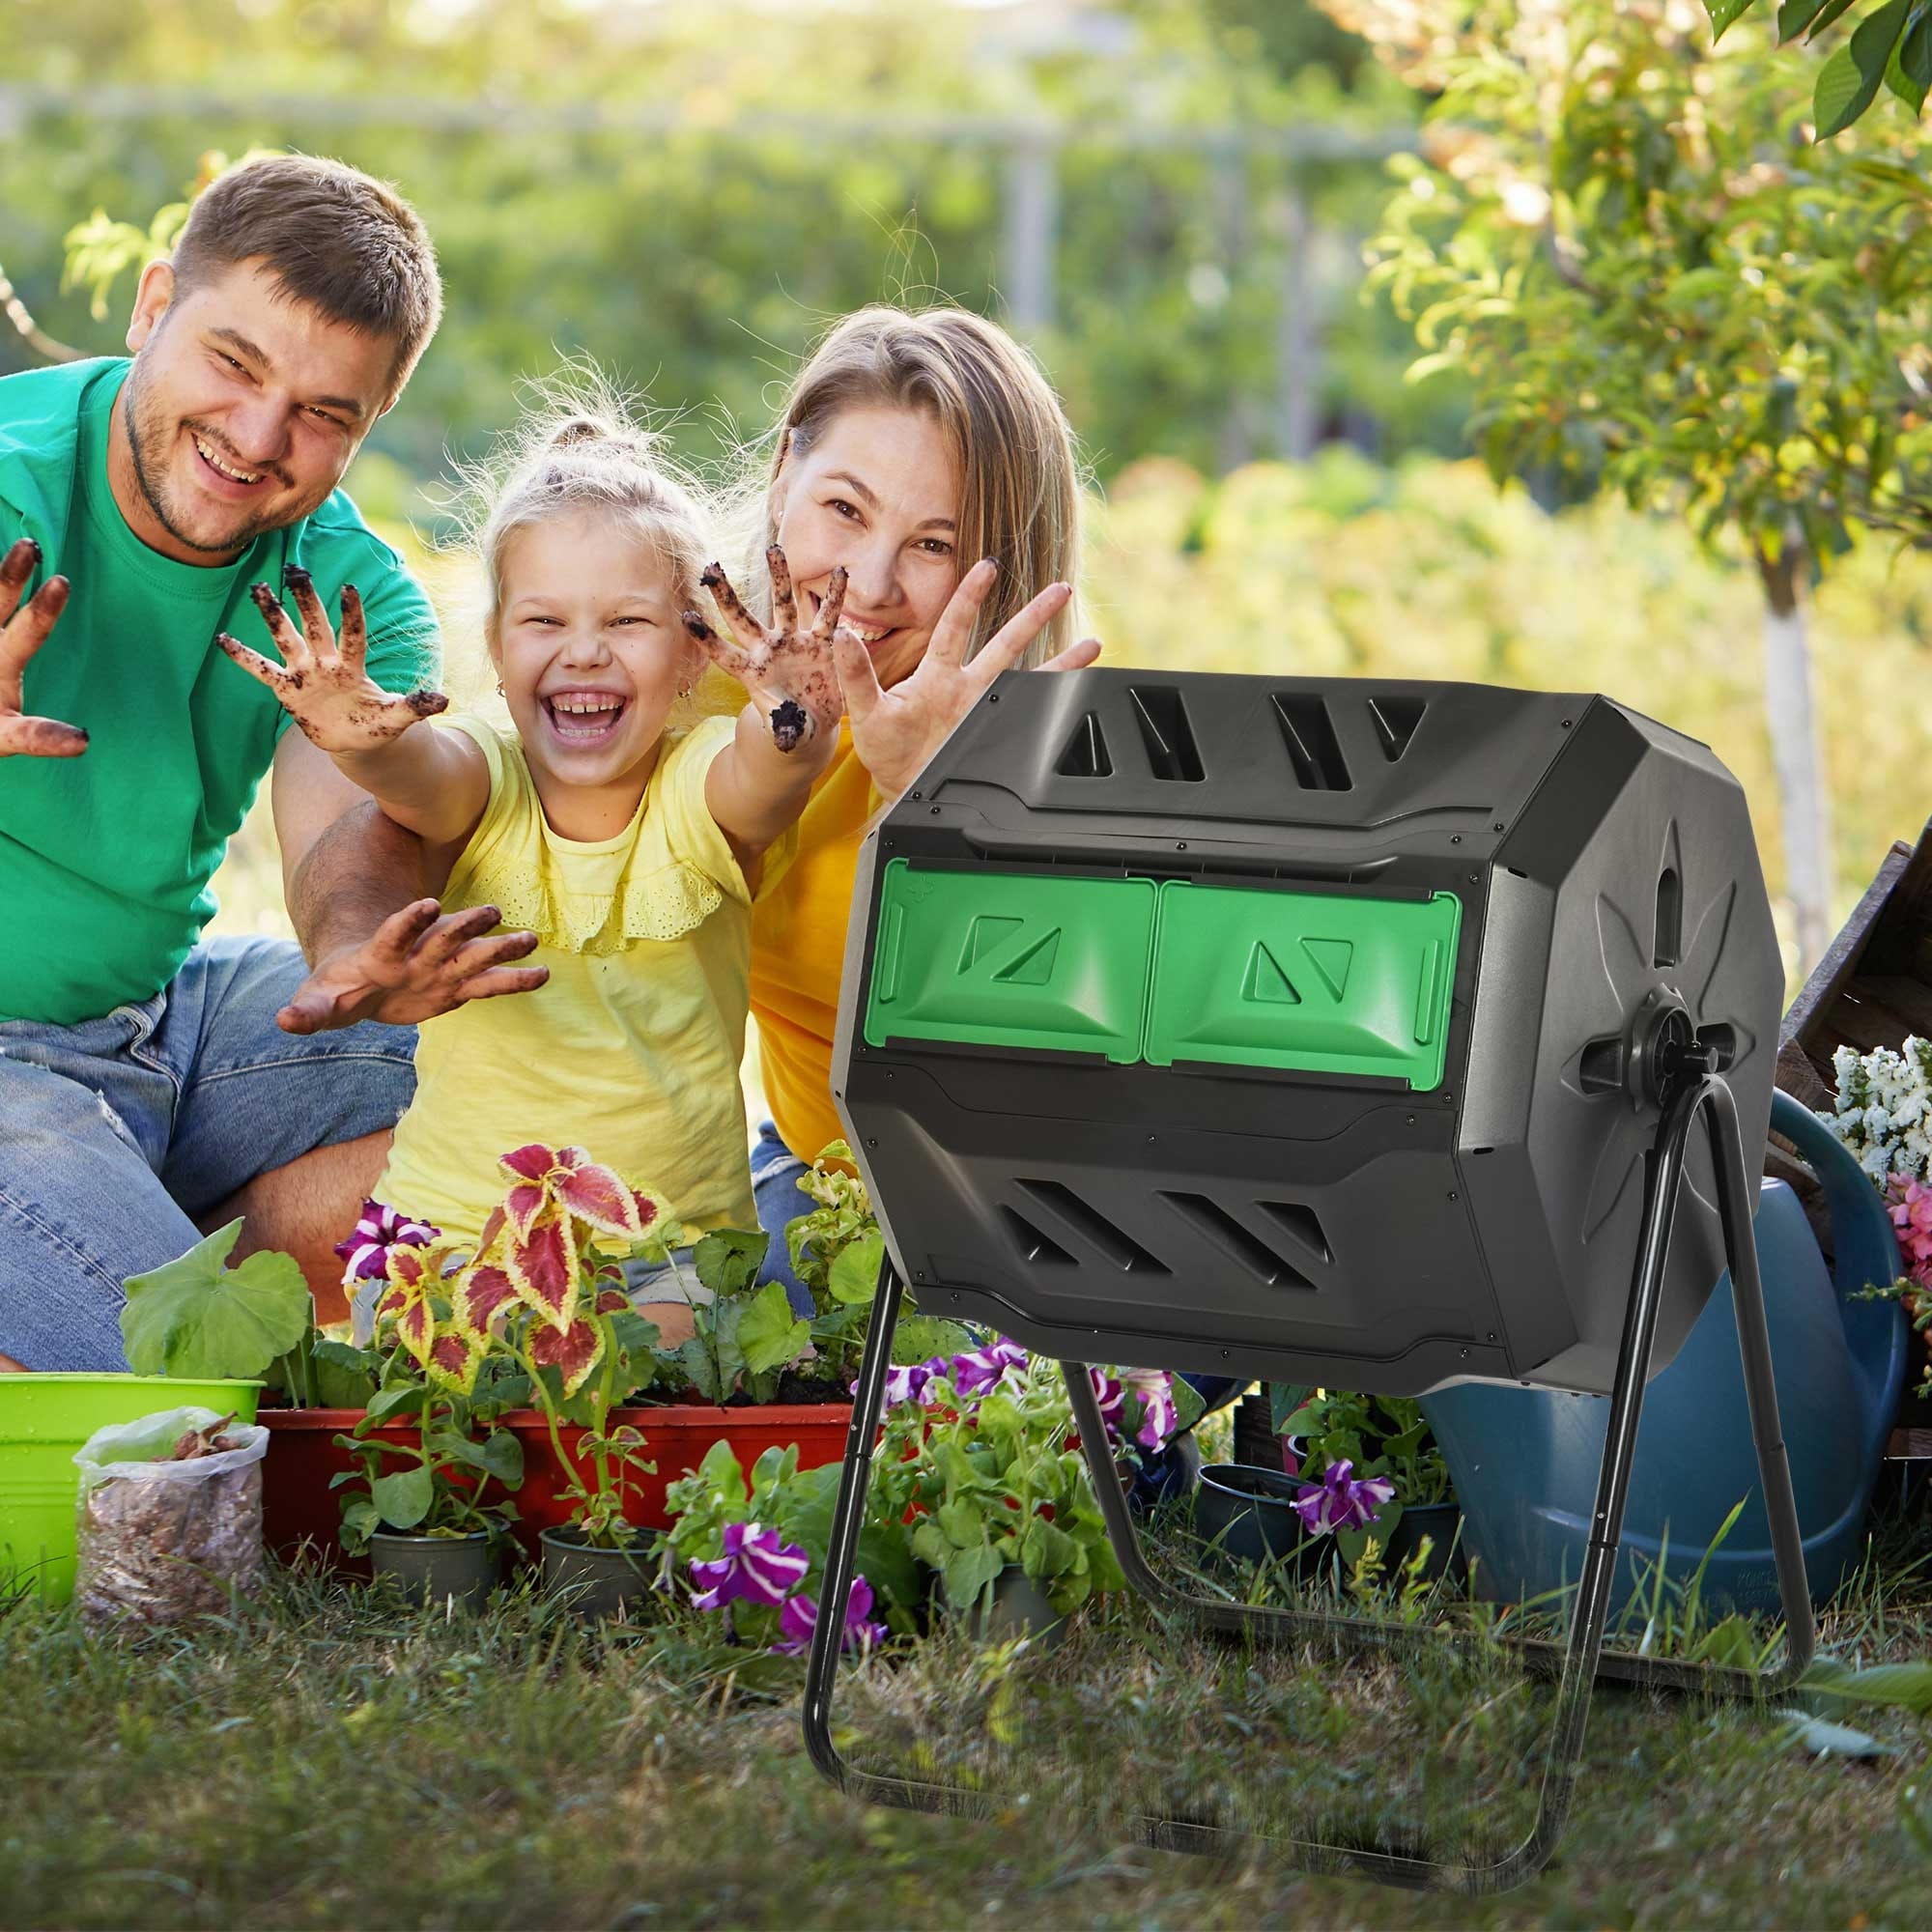 https://ak1.ostkcdn.com/images/products/is/images/direct/635a07a92900efba20209c440305b4627985d811/Outsunny-Tumbling-Compost-Bin-Outdoor-Dual-Chamber-360%C2%B0-Rotating-Composter-43-Gallon-w--Sliding-Doors-%26-Solid-Steel-Frame.jpg